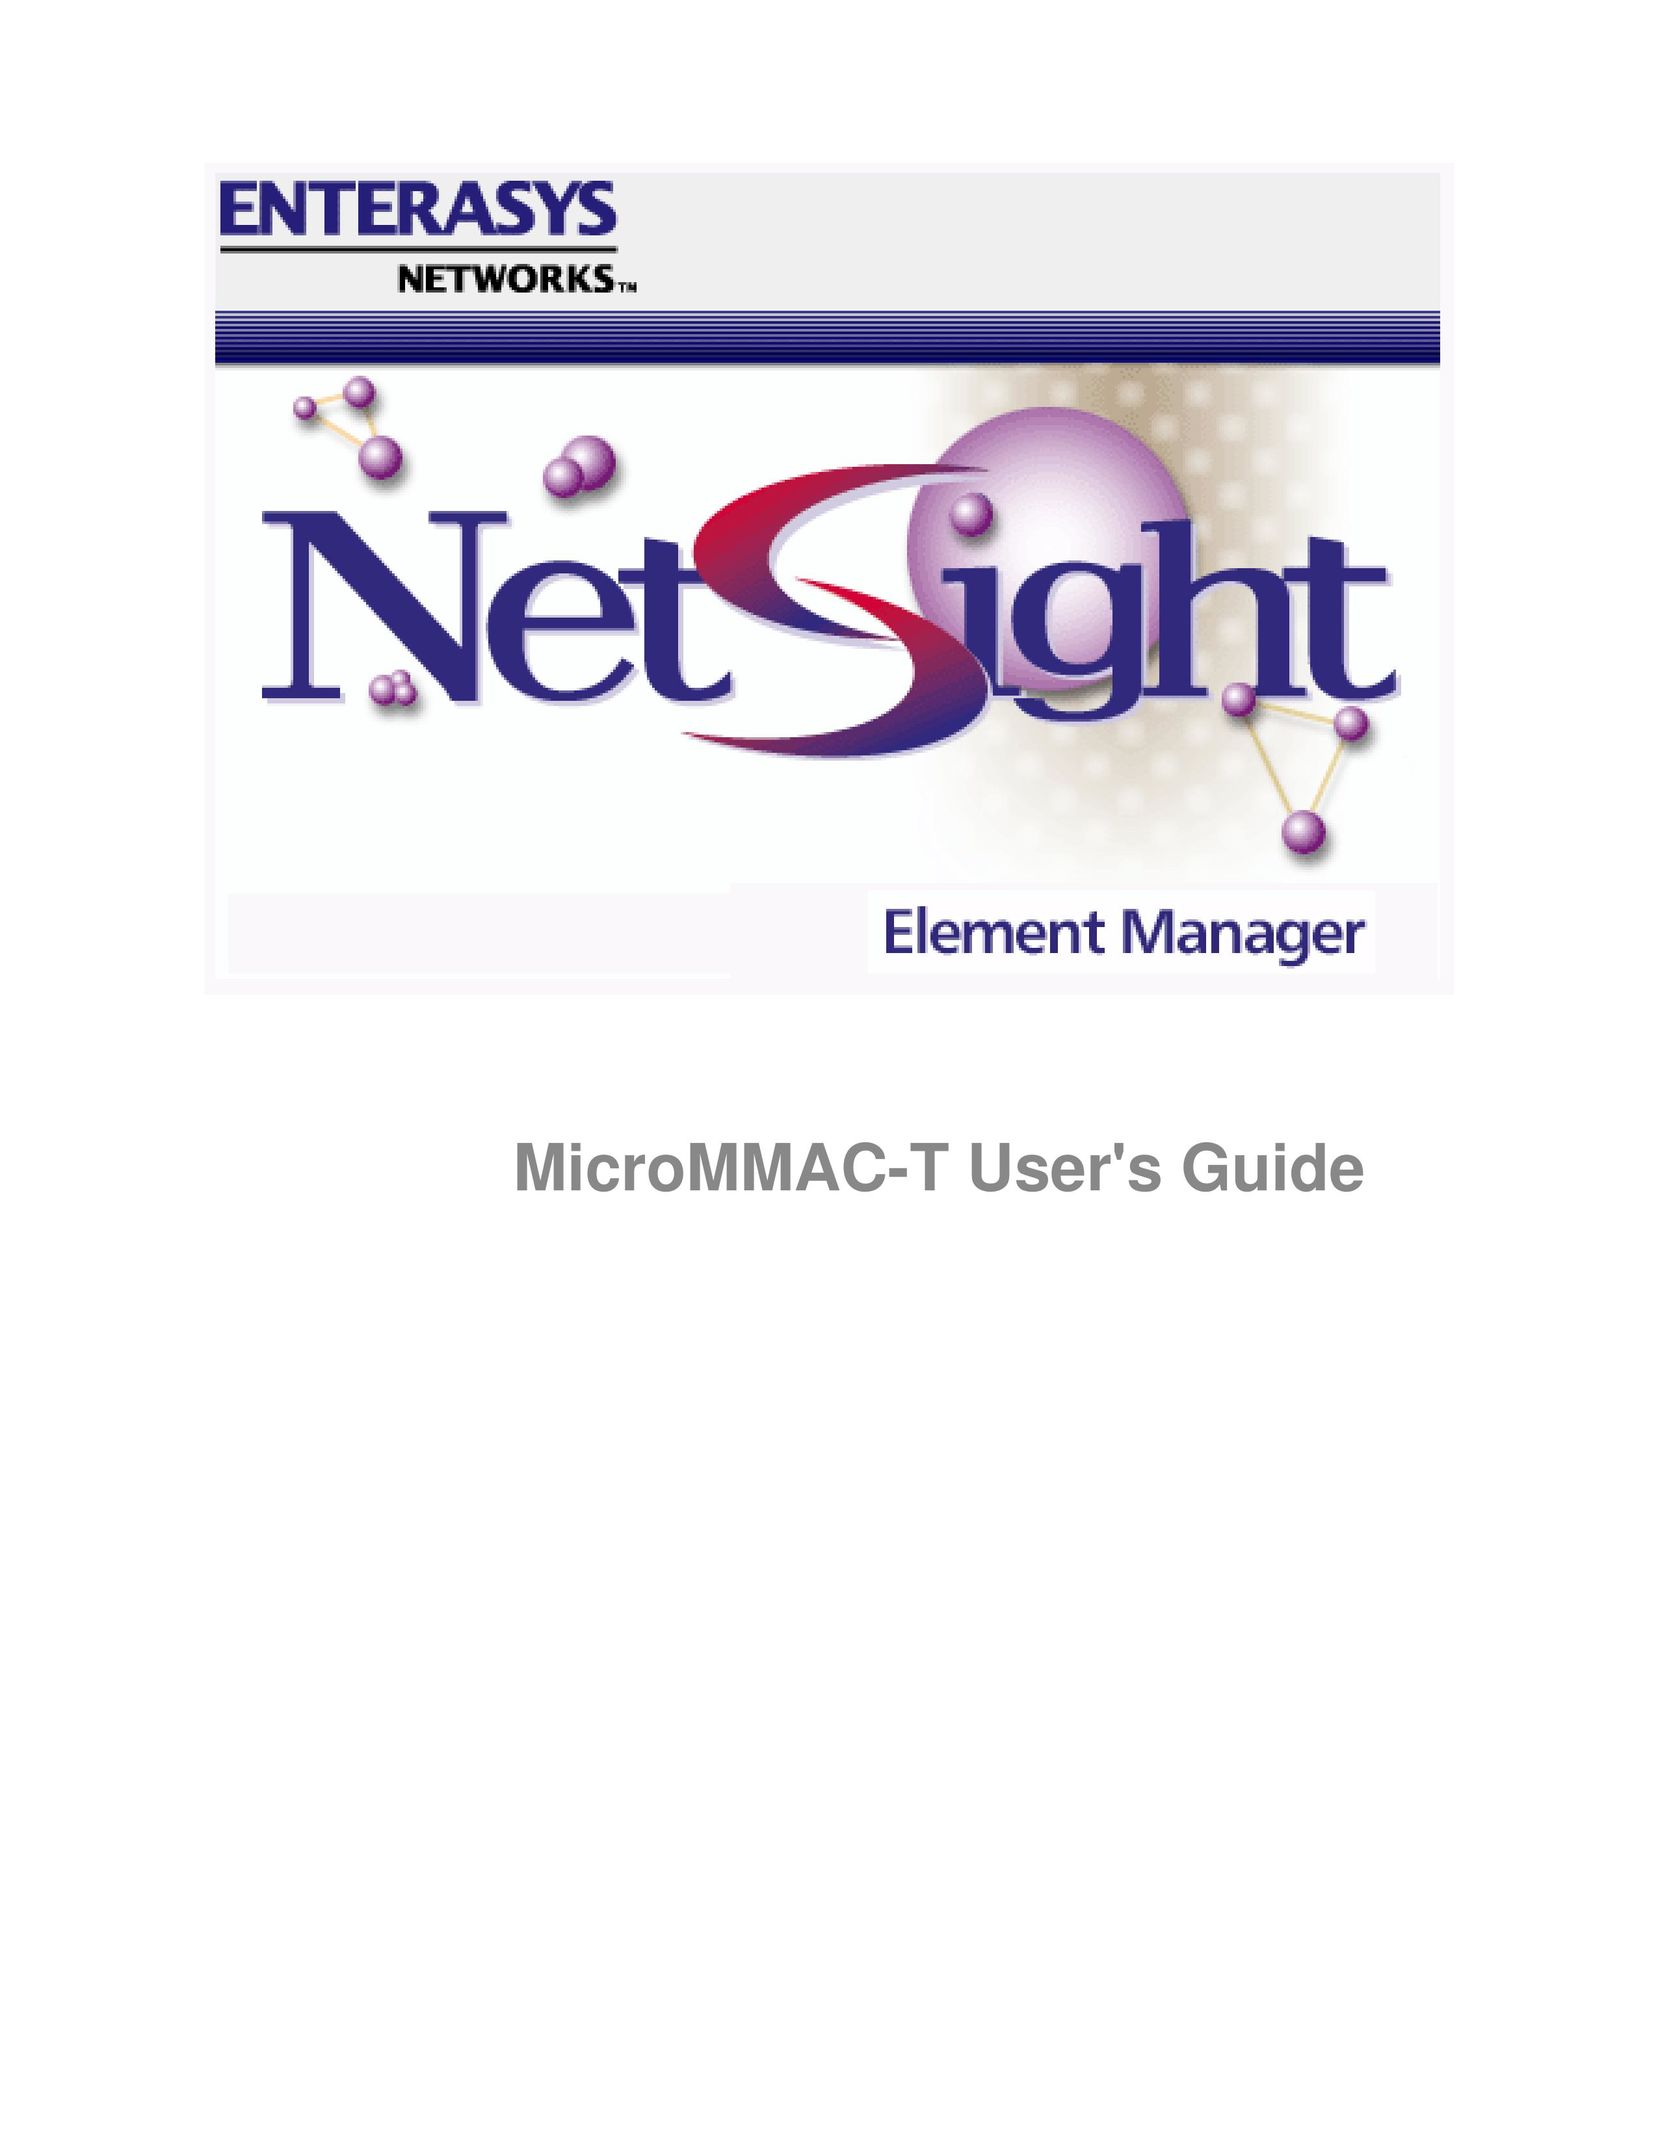 Enterasys Networks MicroMMAC-T Network Card User Manual